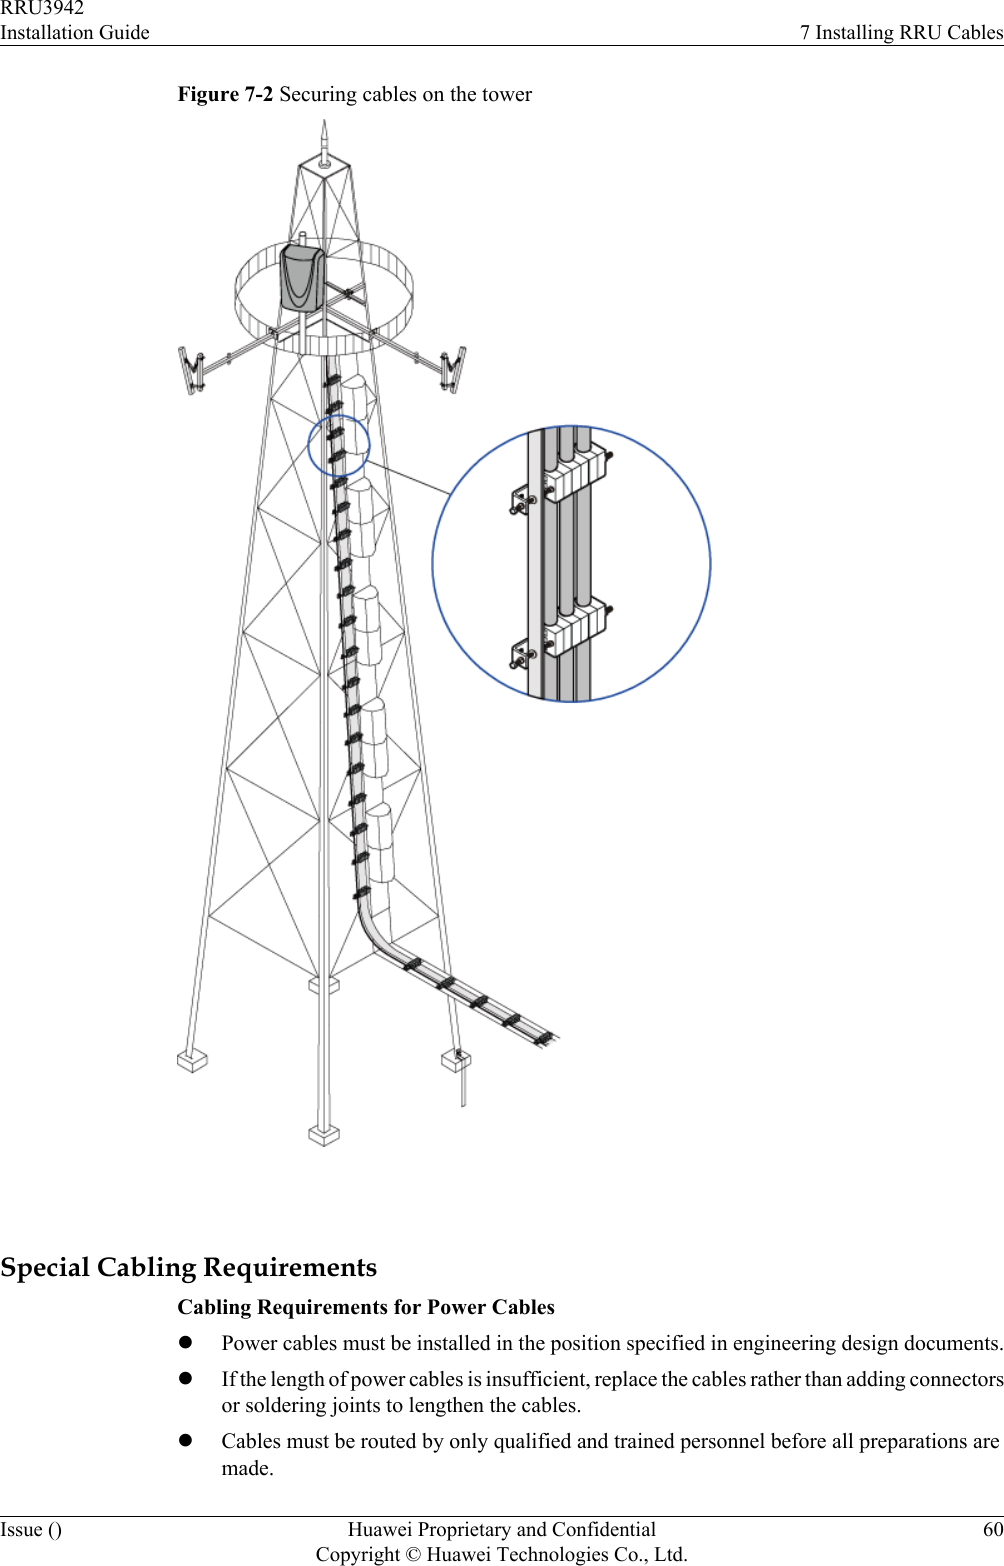 Figure 7-2 Securing cables on the tower Special Cabling RequirementsCabling Requirements for Power CableslPower cables must be installed in the position specified in engineering design documents.lIf the length of power cables is insufficient, replace the cables rather than adding connectorsor soldering joints to lengthen the cables.lCables must be routed by only qualified and trained personnel before all preparations aremade.RRU3942Installation Guide 7 Installing RRU CablesIssue () Huawei Proprietary and ConfidentialCopyright © Huawei Technologies Co., Ltd.60